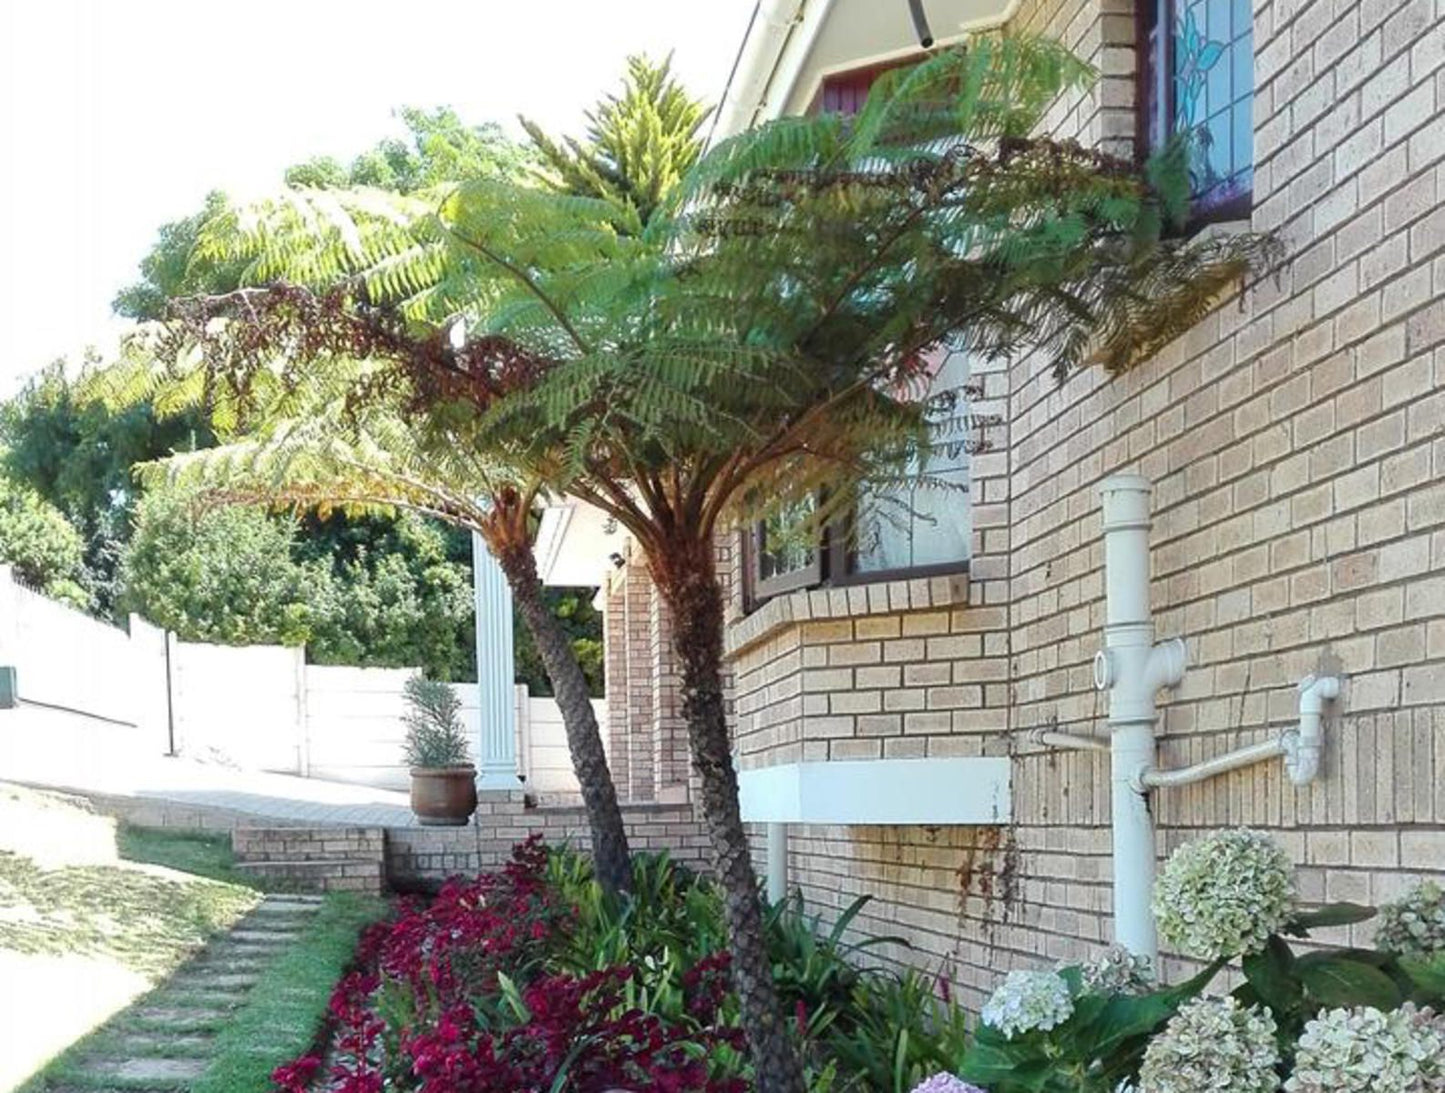 Astral Guest House Wilderness Western Cape South Africa House, Building, Architecture, Palm Tree, Plant, Nature, Wood, Garden